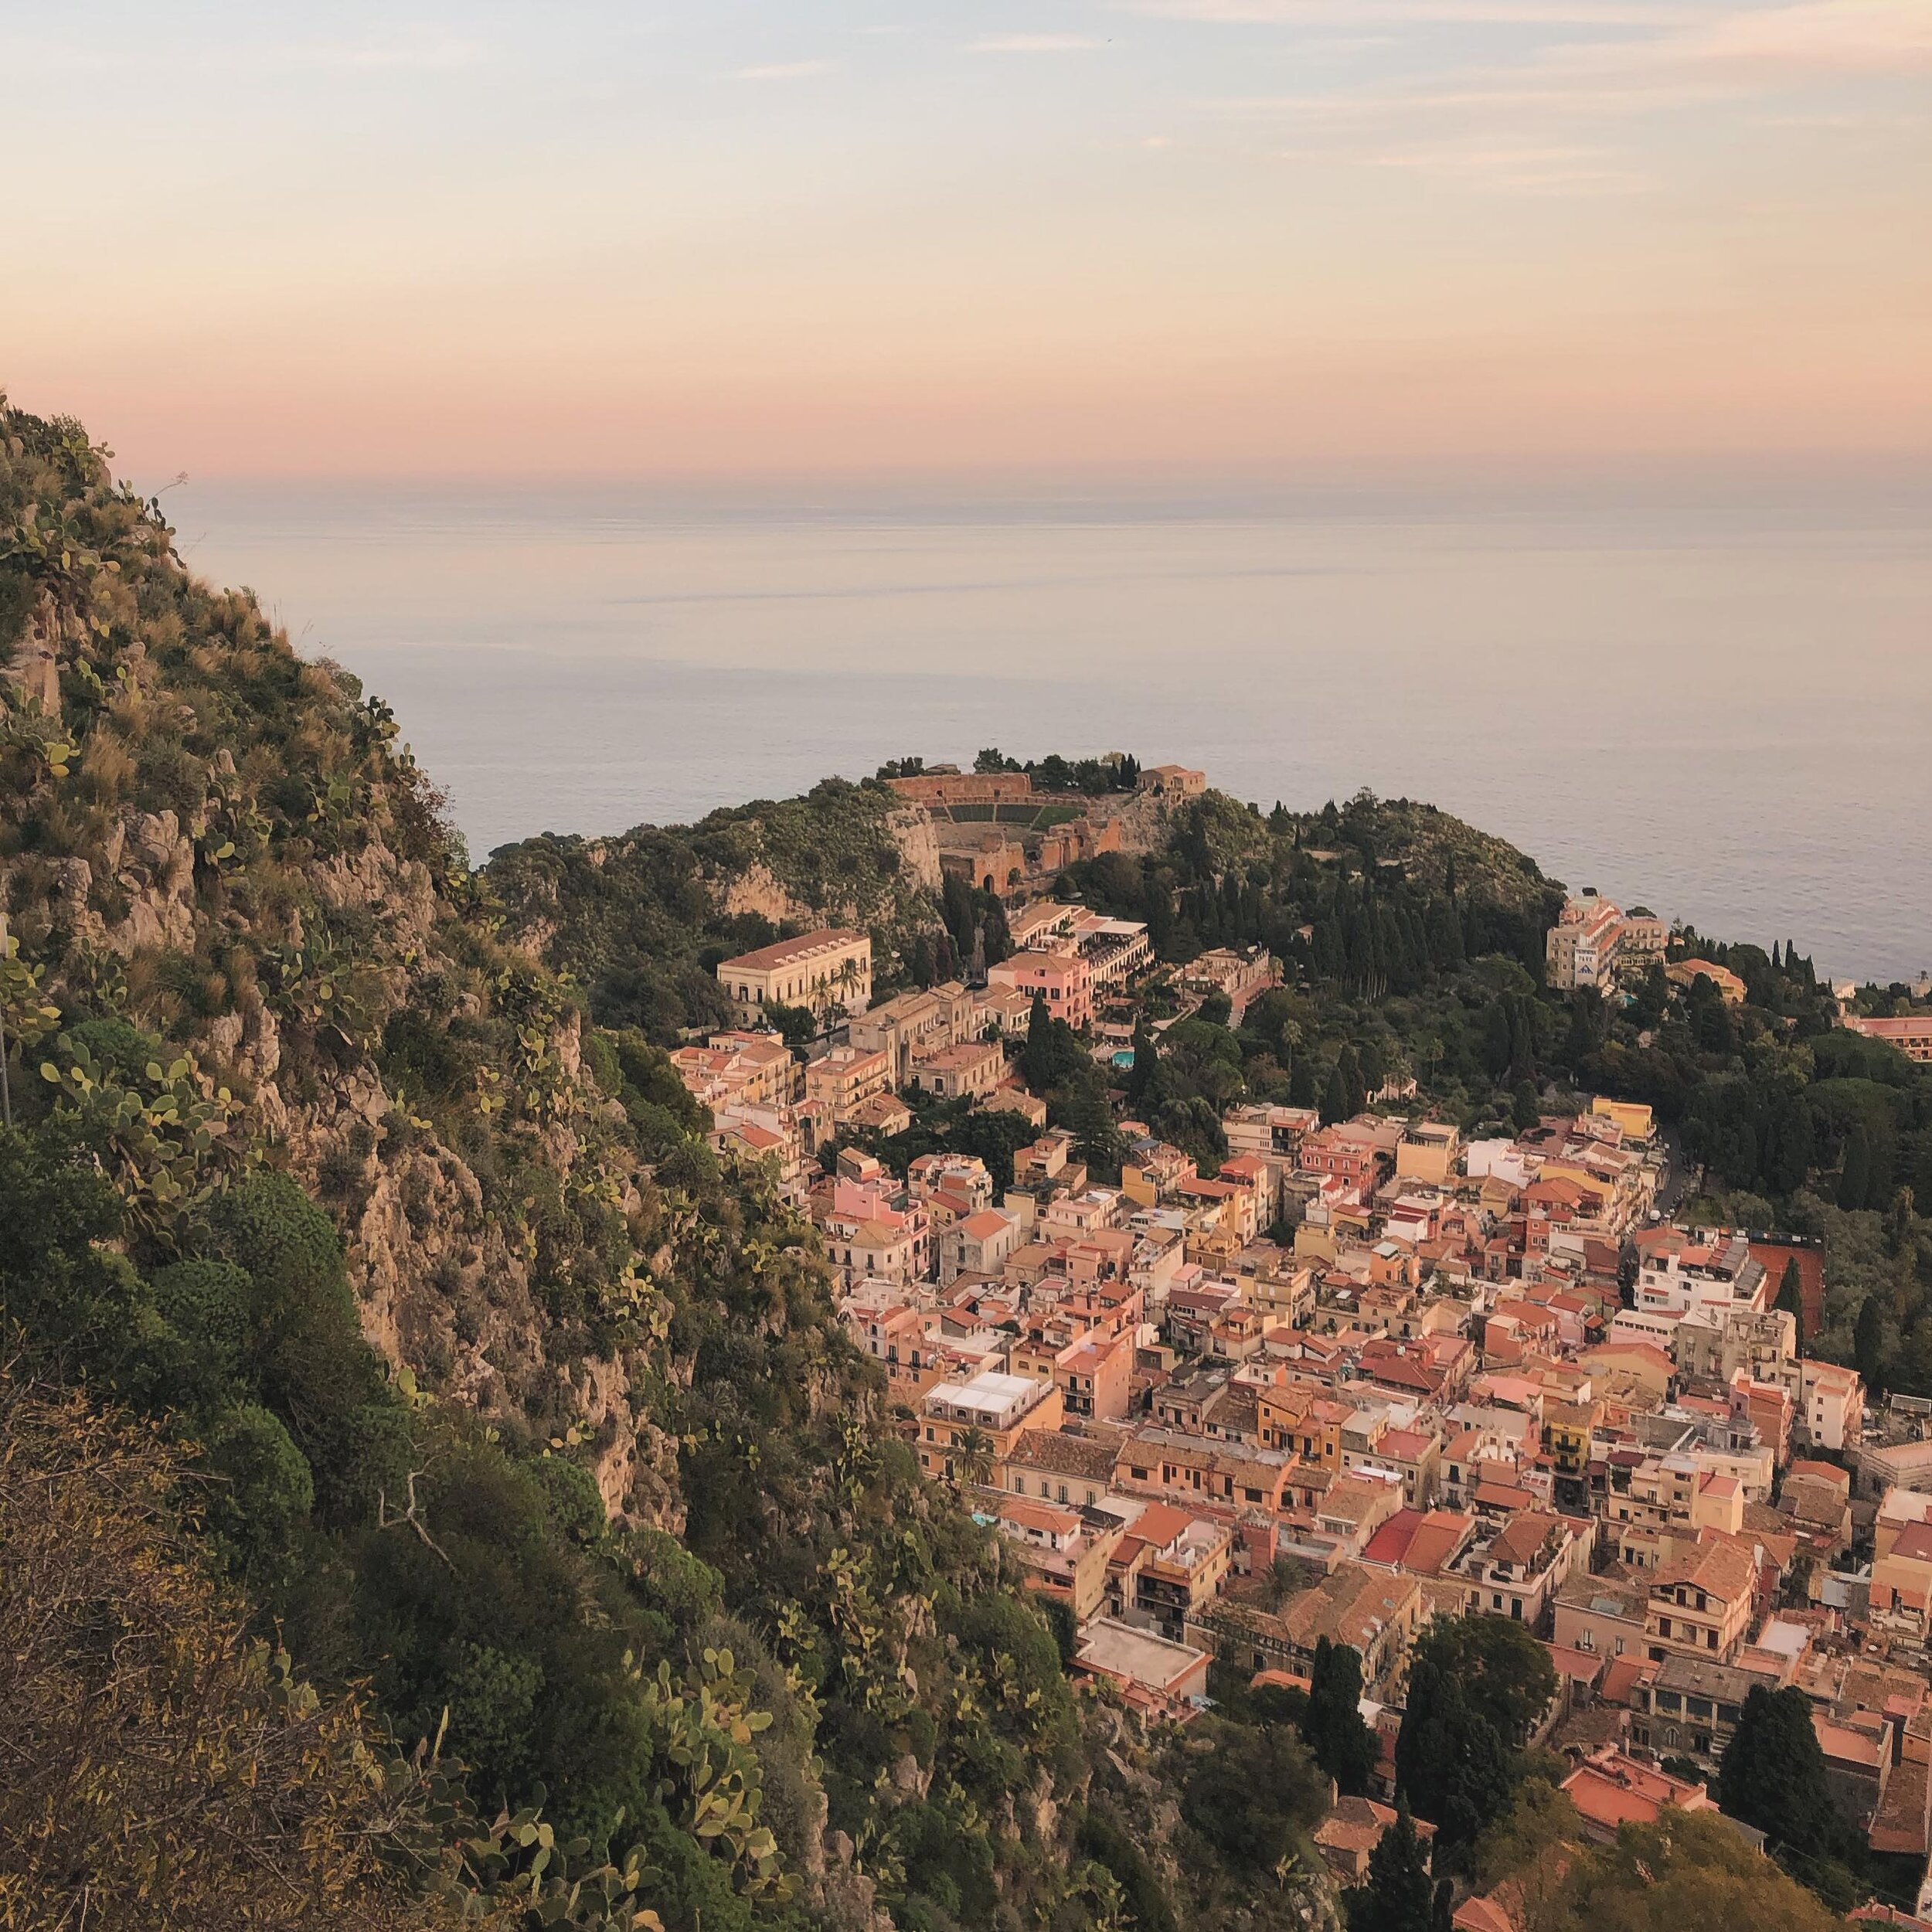 The setting for our retreat - Taormina, Sicily✨

Sicily, the largest island of the Mediterranean, is everything you expect from Southern Italy, and much more. The melting pot of cultures that Sicily has become due to centuries of being conquered by d